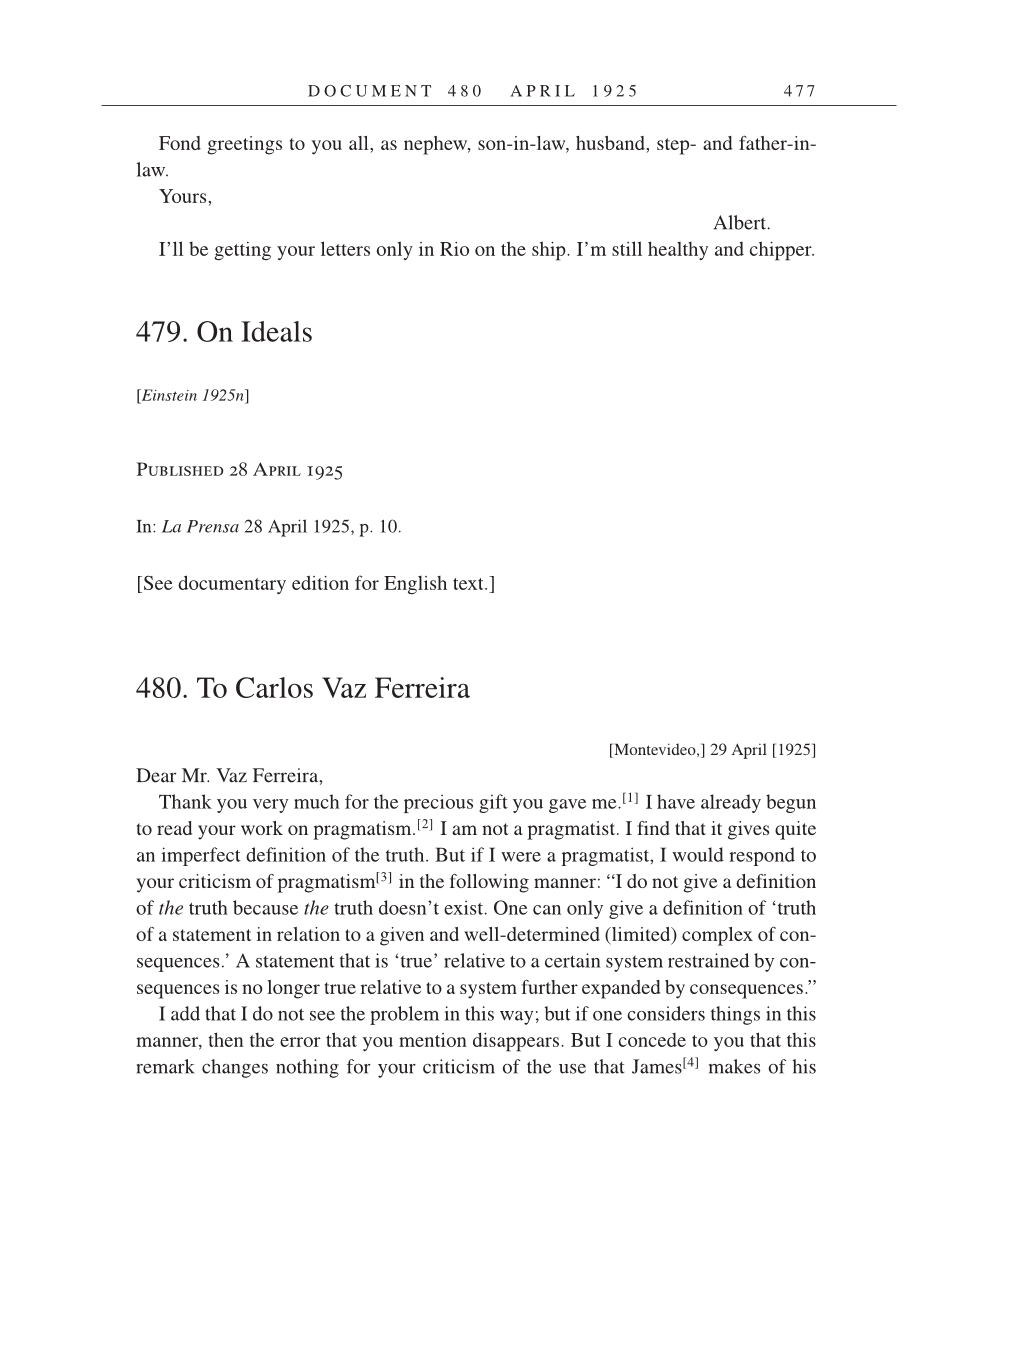 Volume 14: The Berlin Years: Writings & Correspondence, April 1923-May 1925 (English Translation Supplement) page 477